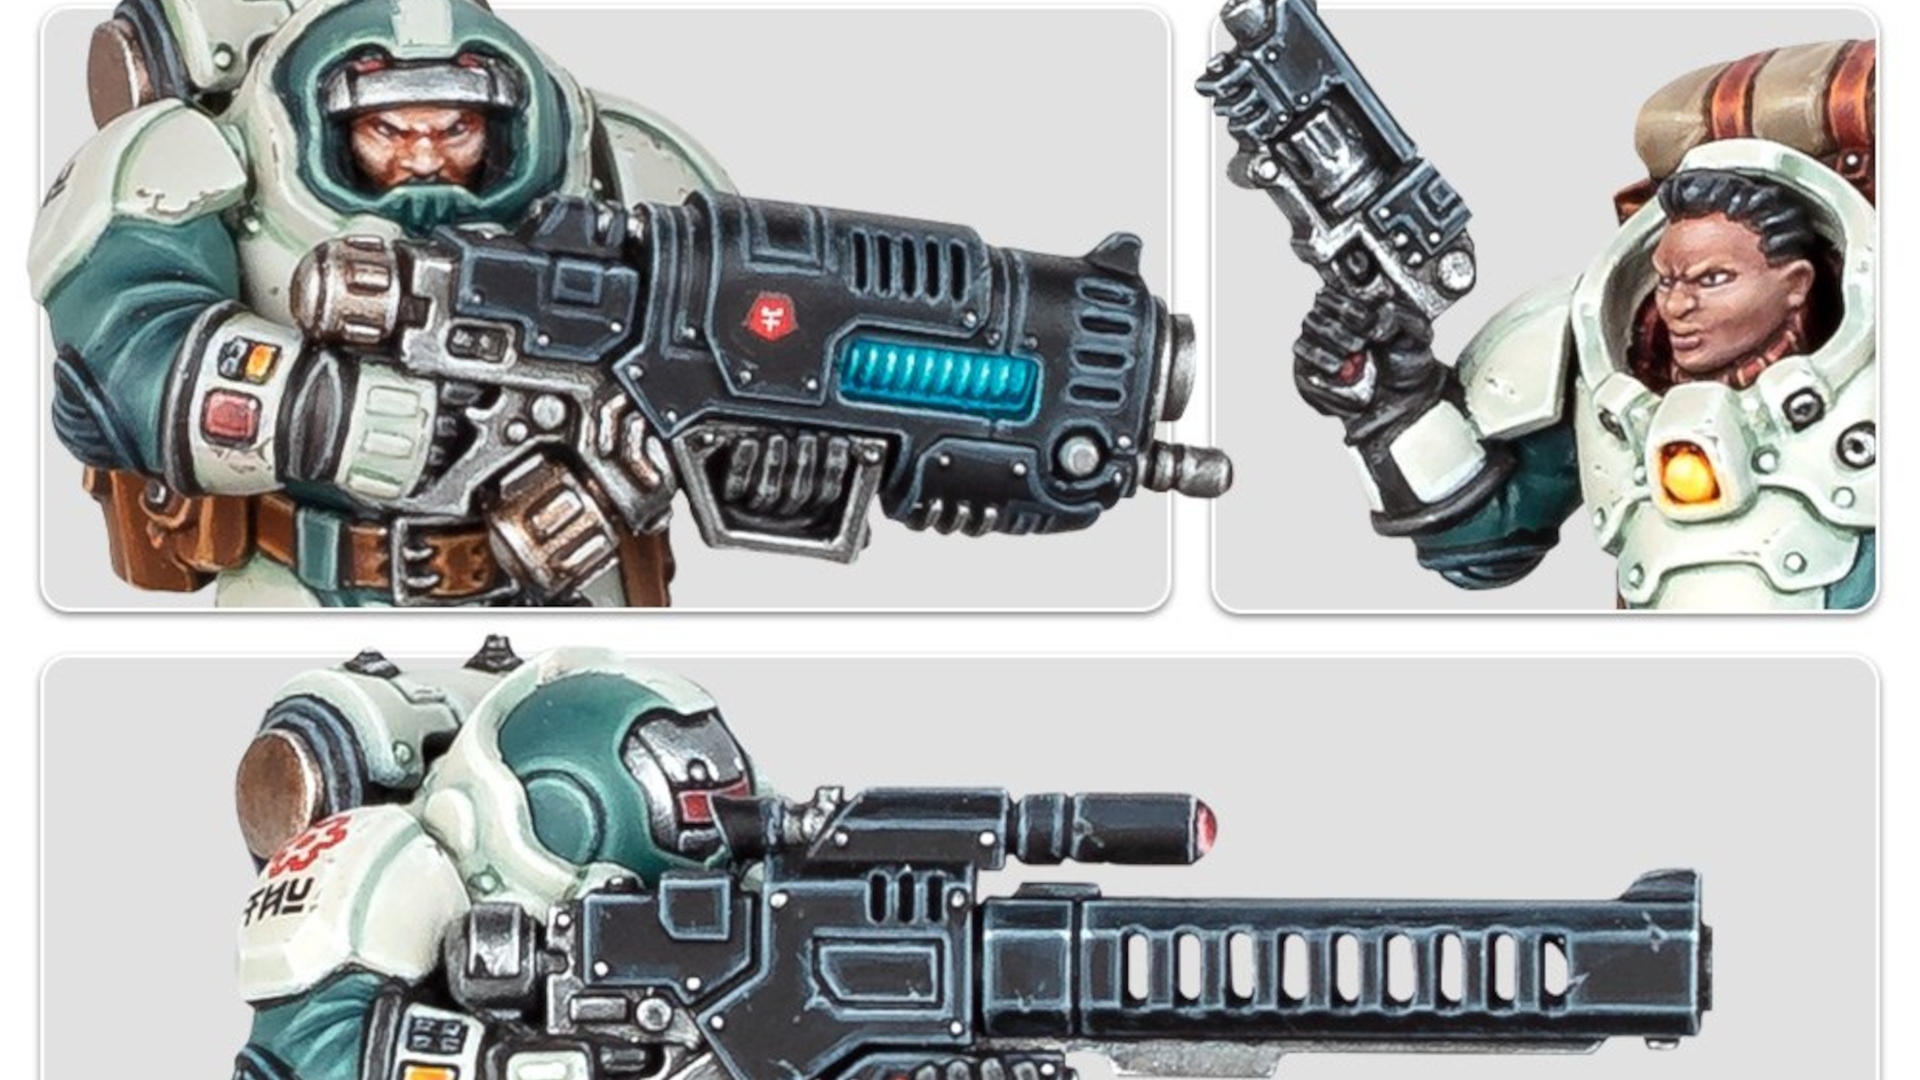 Warhammer 40k Leagues of Votann guide - Games Workshop photo showing close ups of Hearthkyn warriors with different weapons